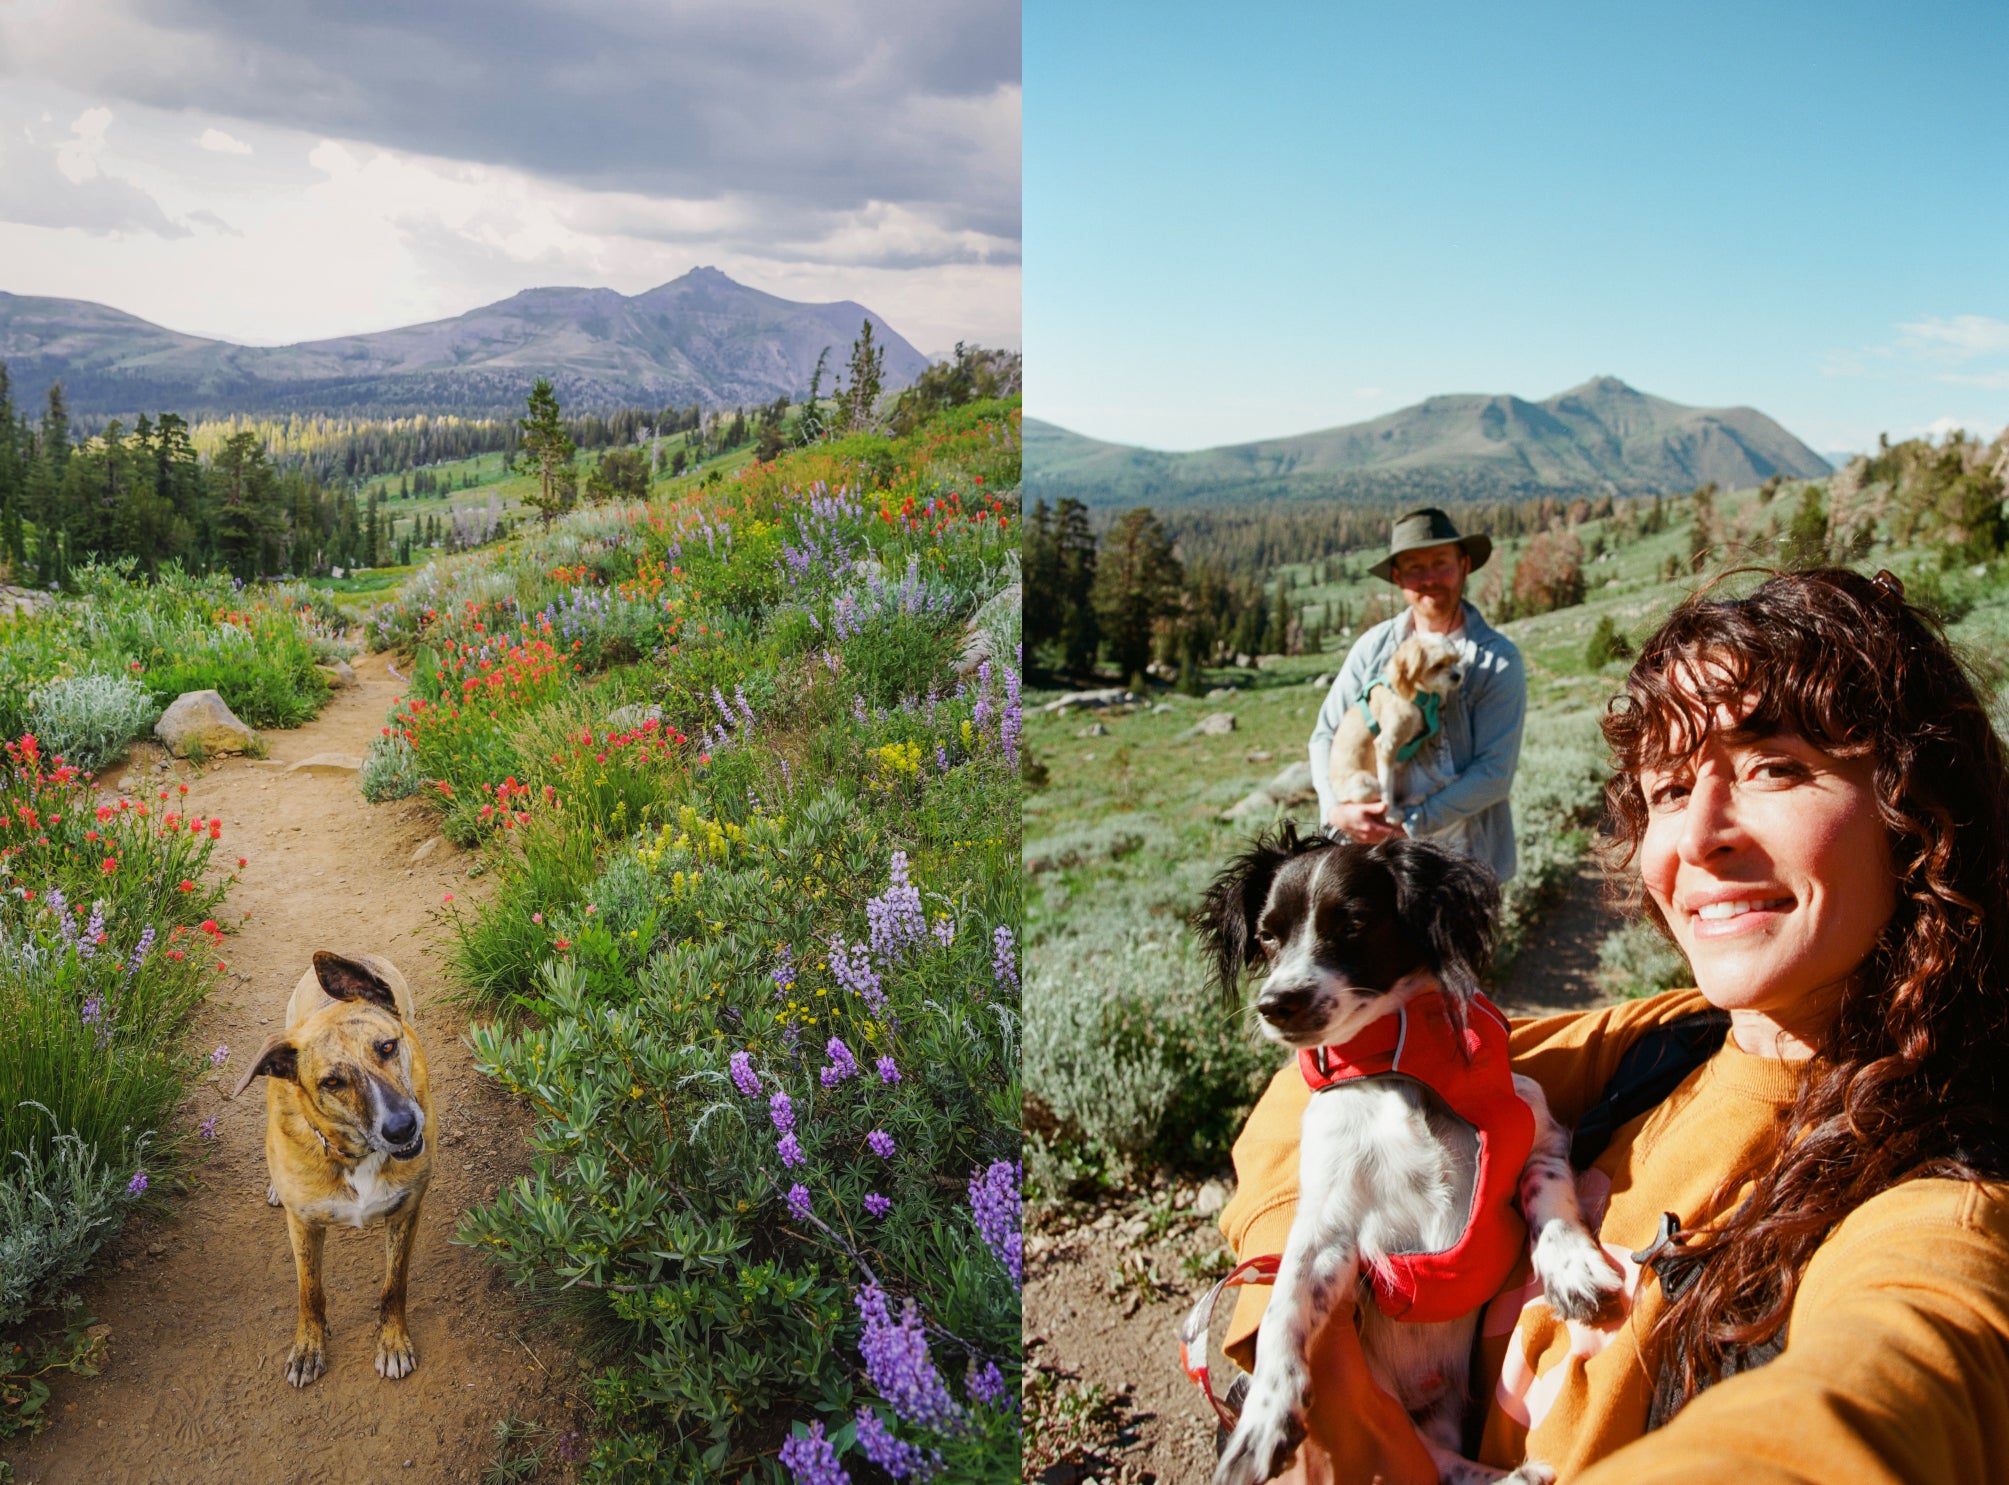 Two Side-by-side images, one of Lhotse on the trail, the other of Noel with new dog Sue on same trail years later